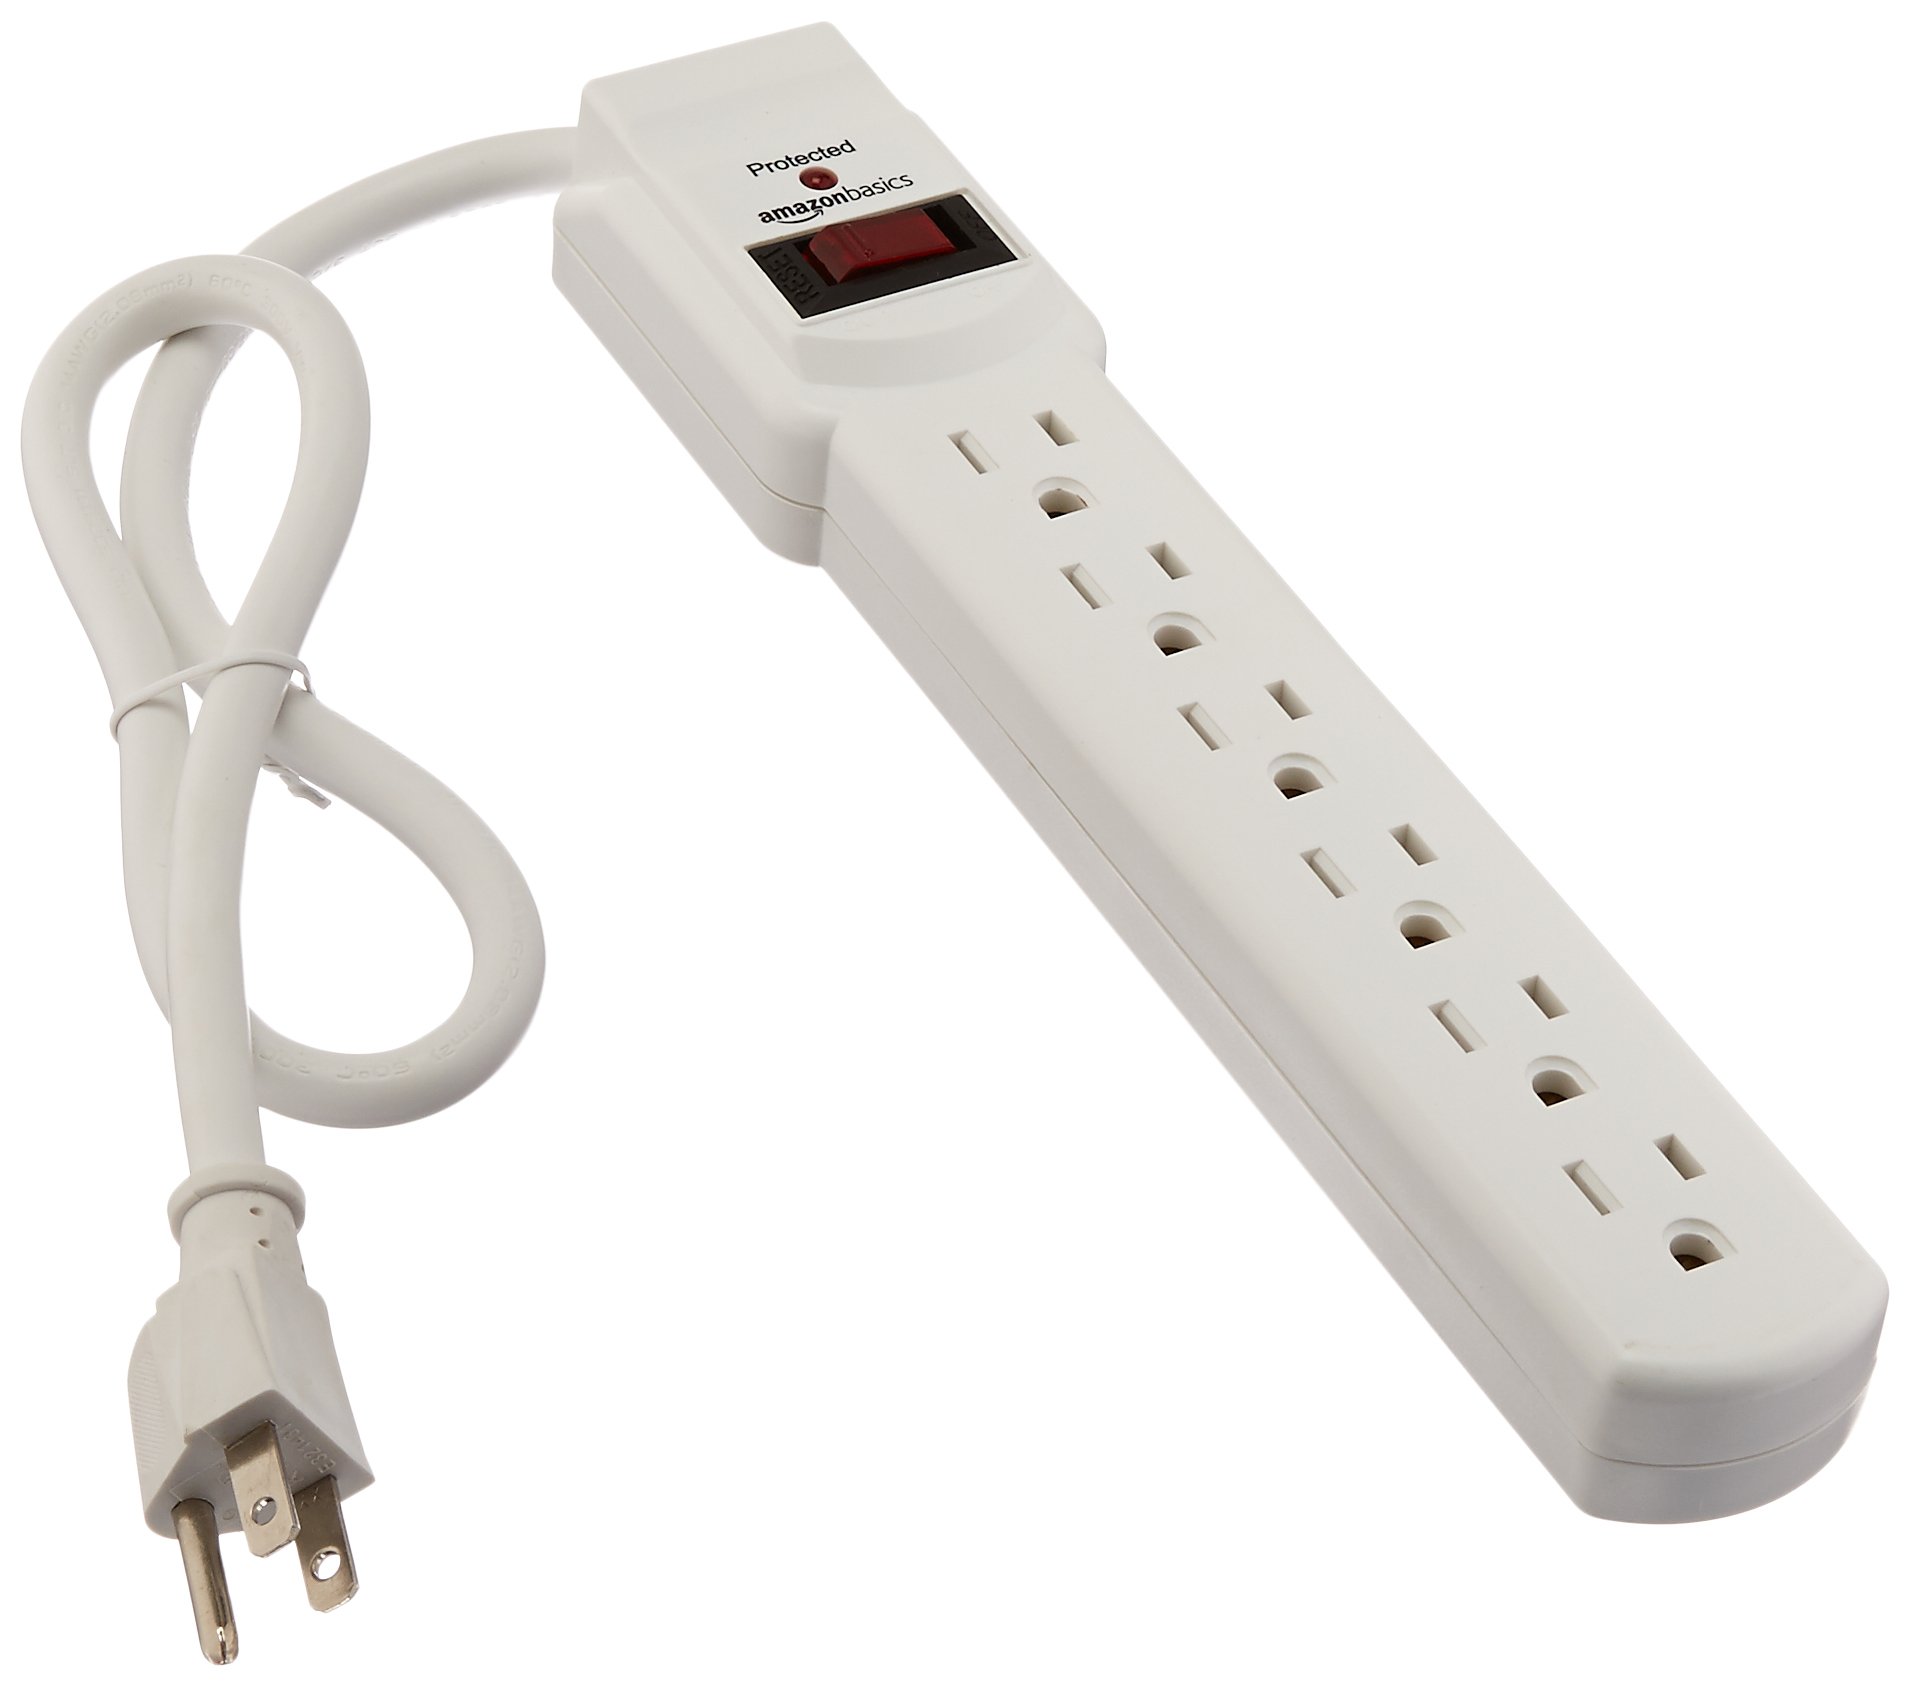 How To Know If A Power Strip Is A Surge Protector